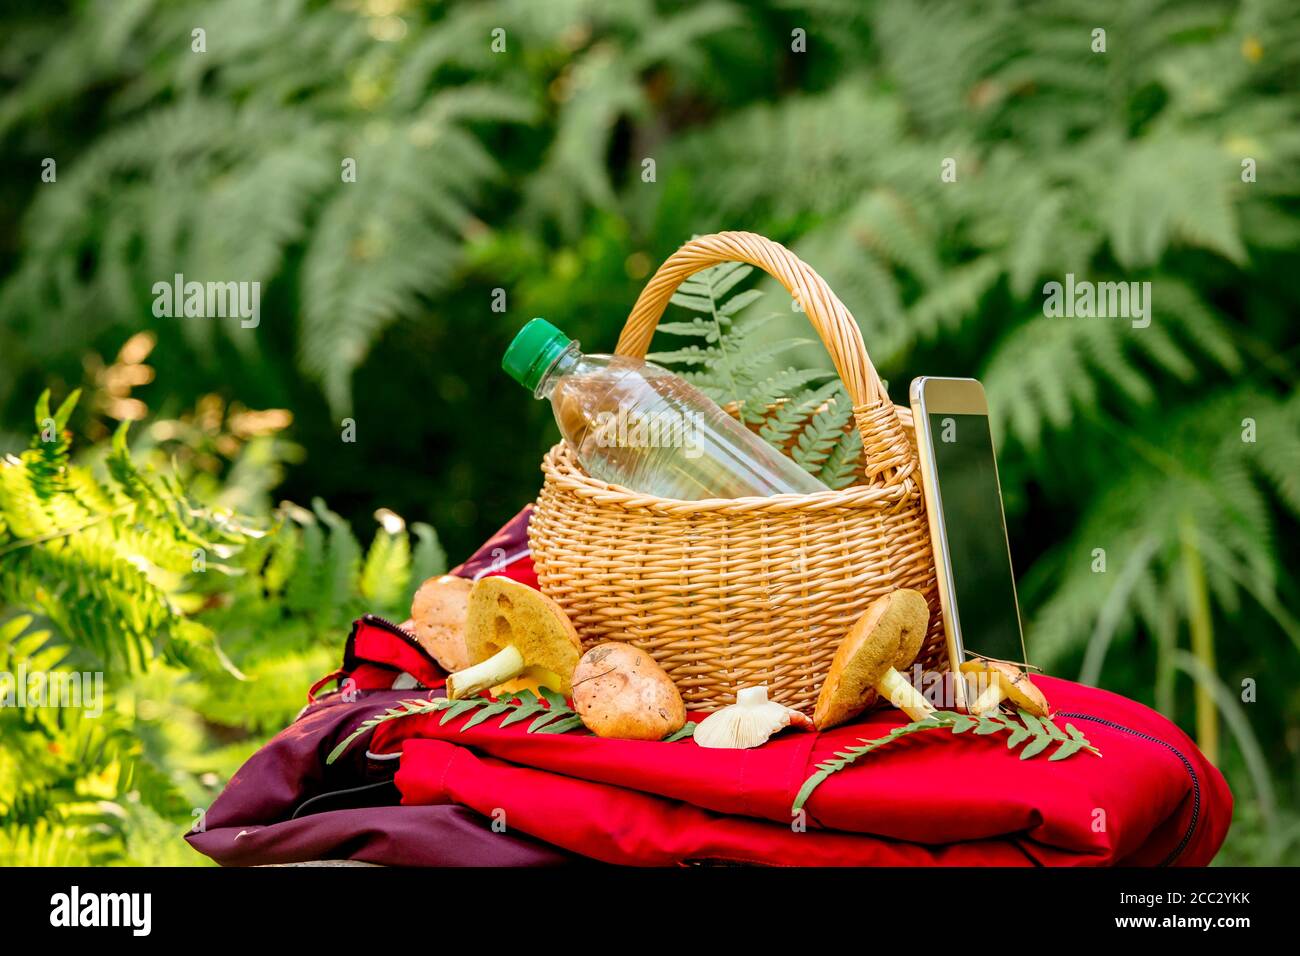 When going to the mushroom picking, bring a charged phone, a water bottle and a warm colored jacket in case of getting lost in the forest. Stock Photo